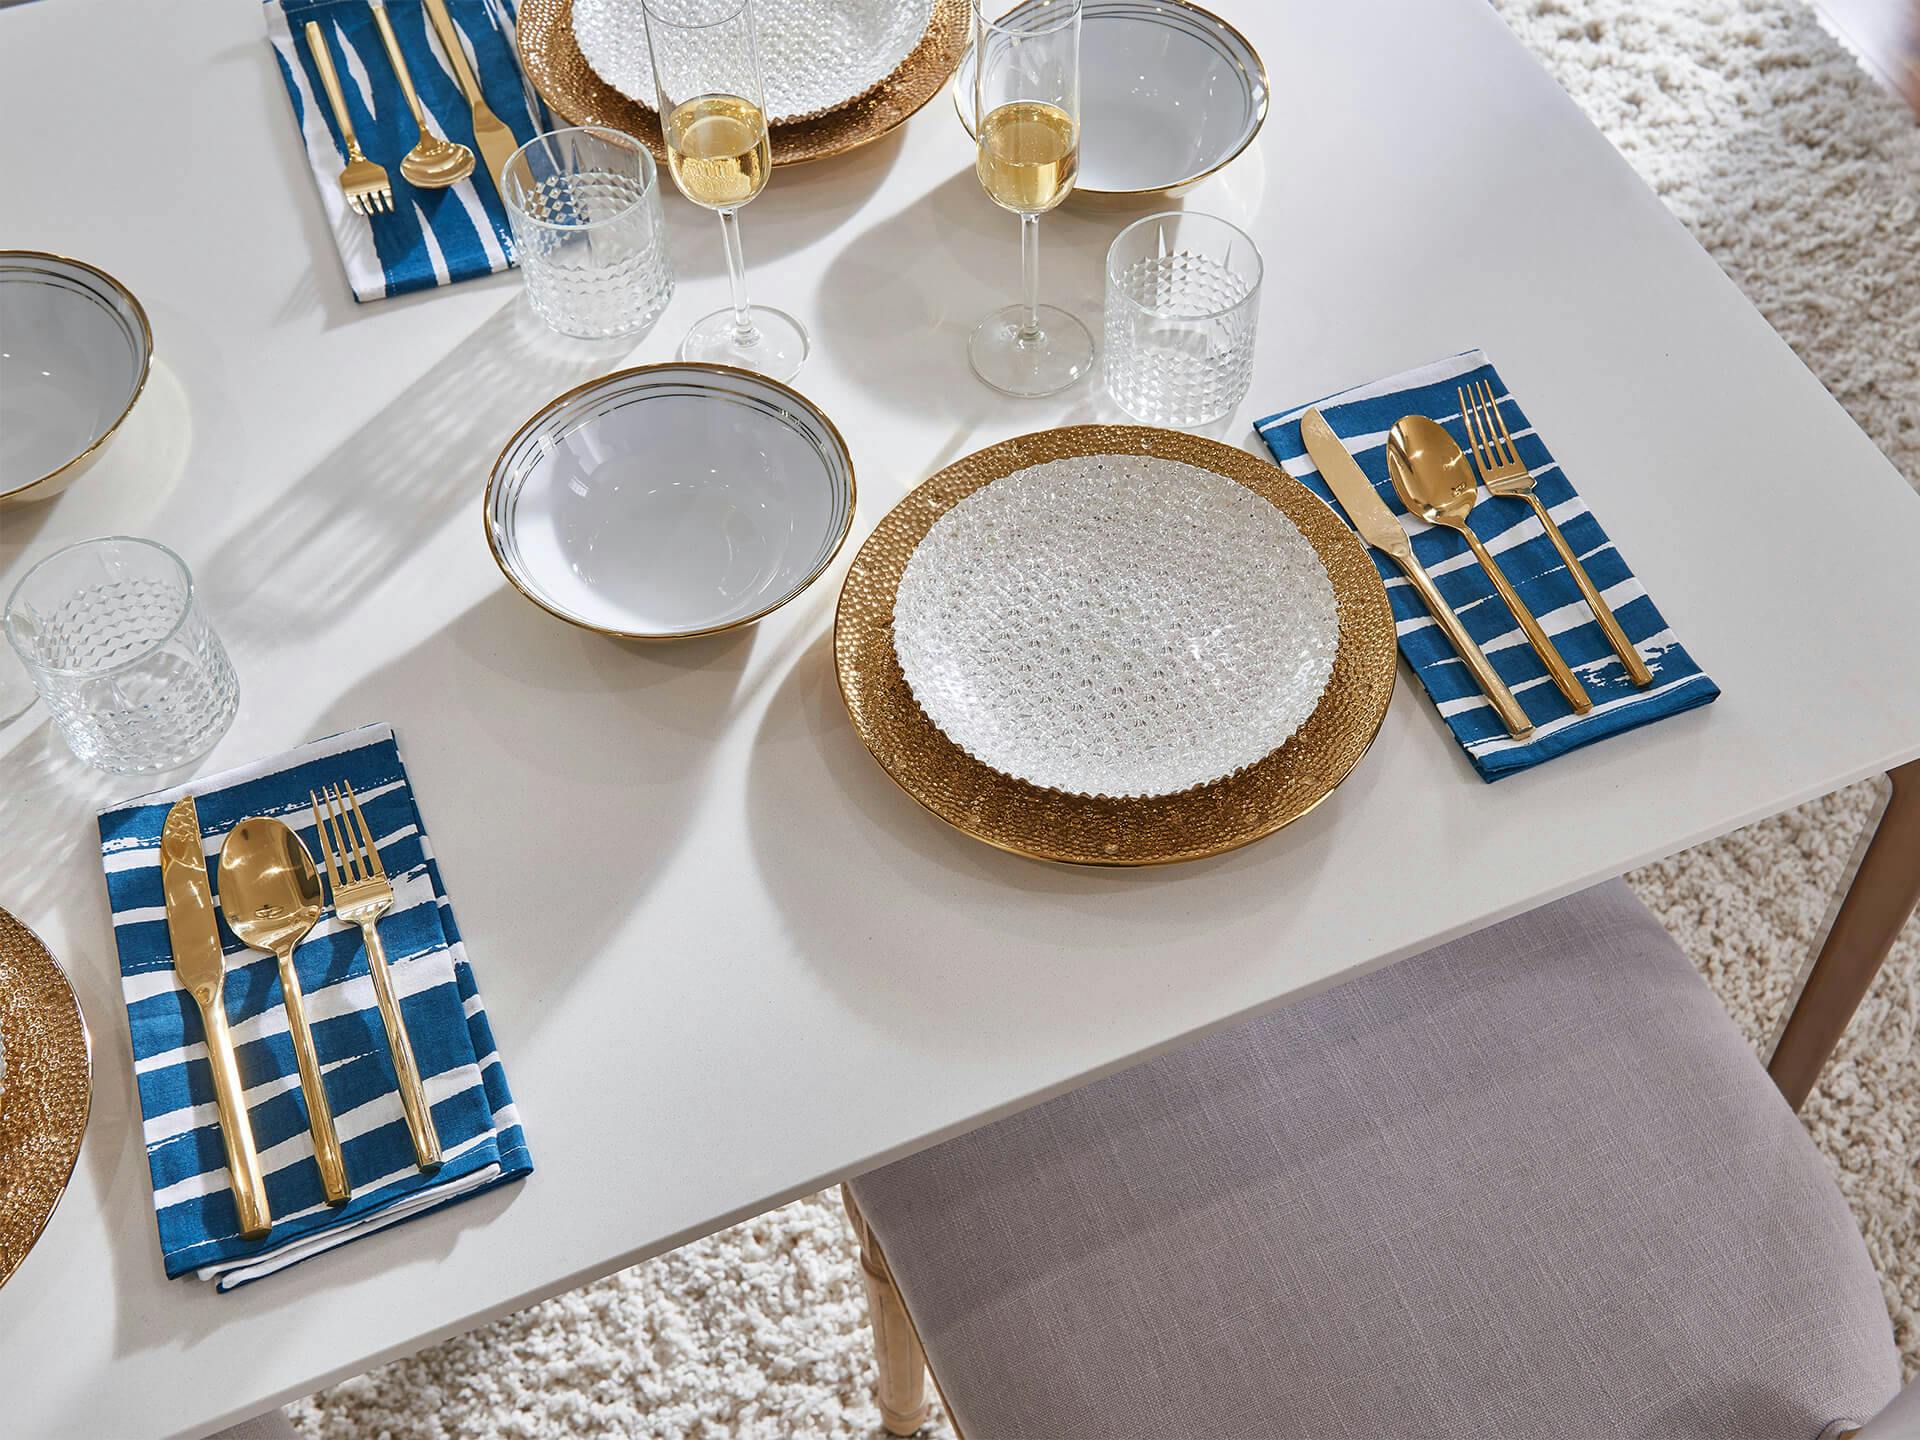 Lifestyle image of a white dinning room table top that has gold finished silverware and dishes for a dinner